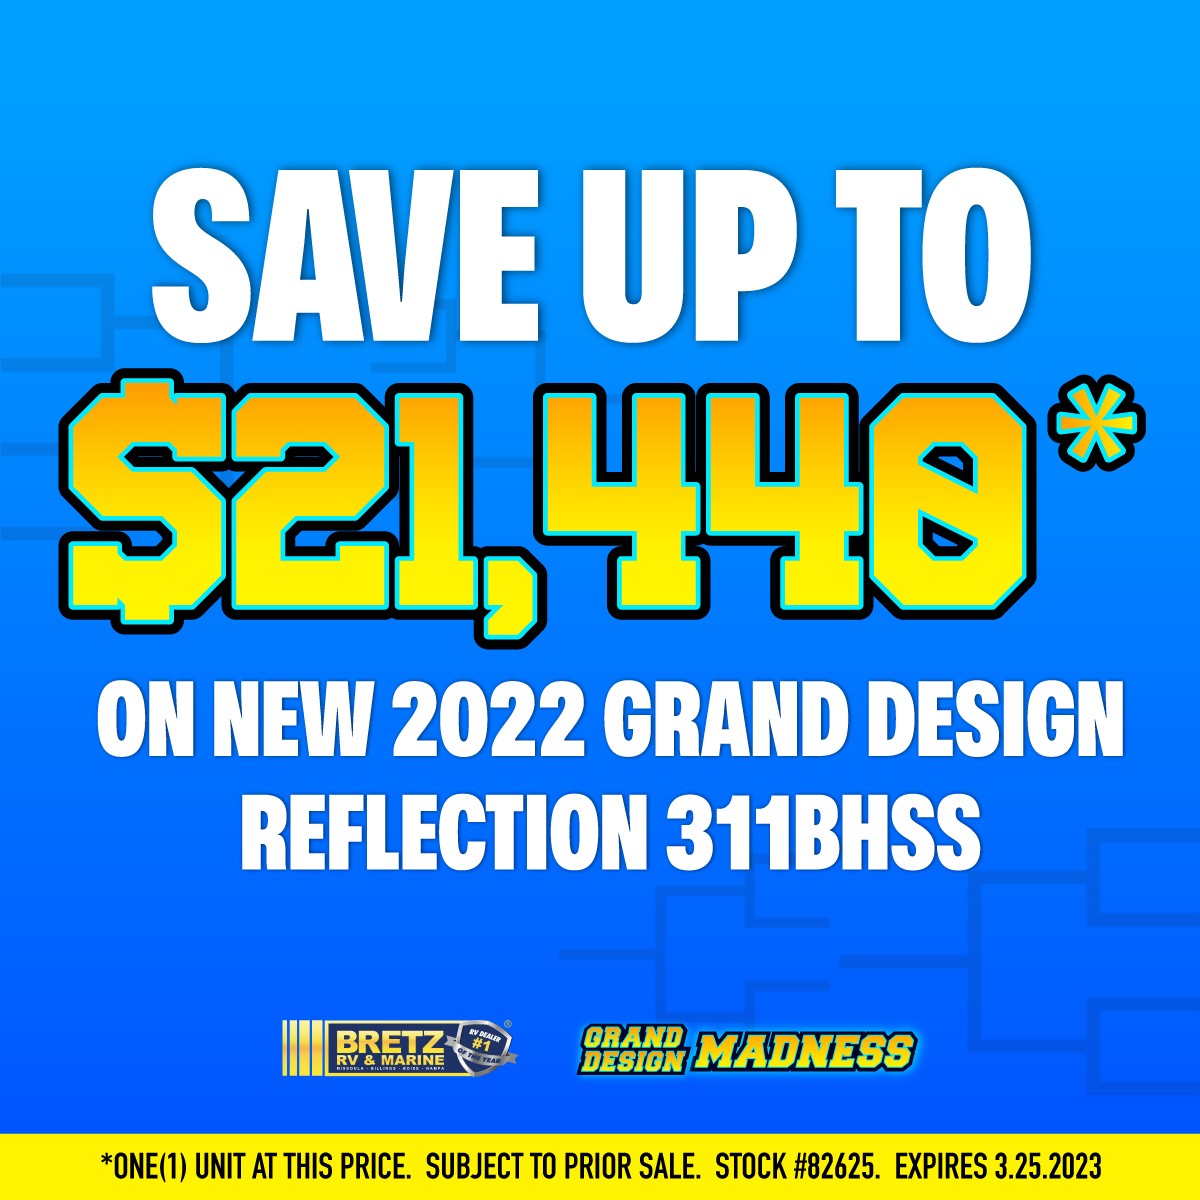 Save up to $21,440 on New 2022 Grand Design Reflection 311BHSs